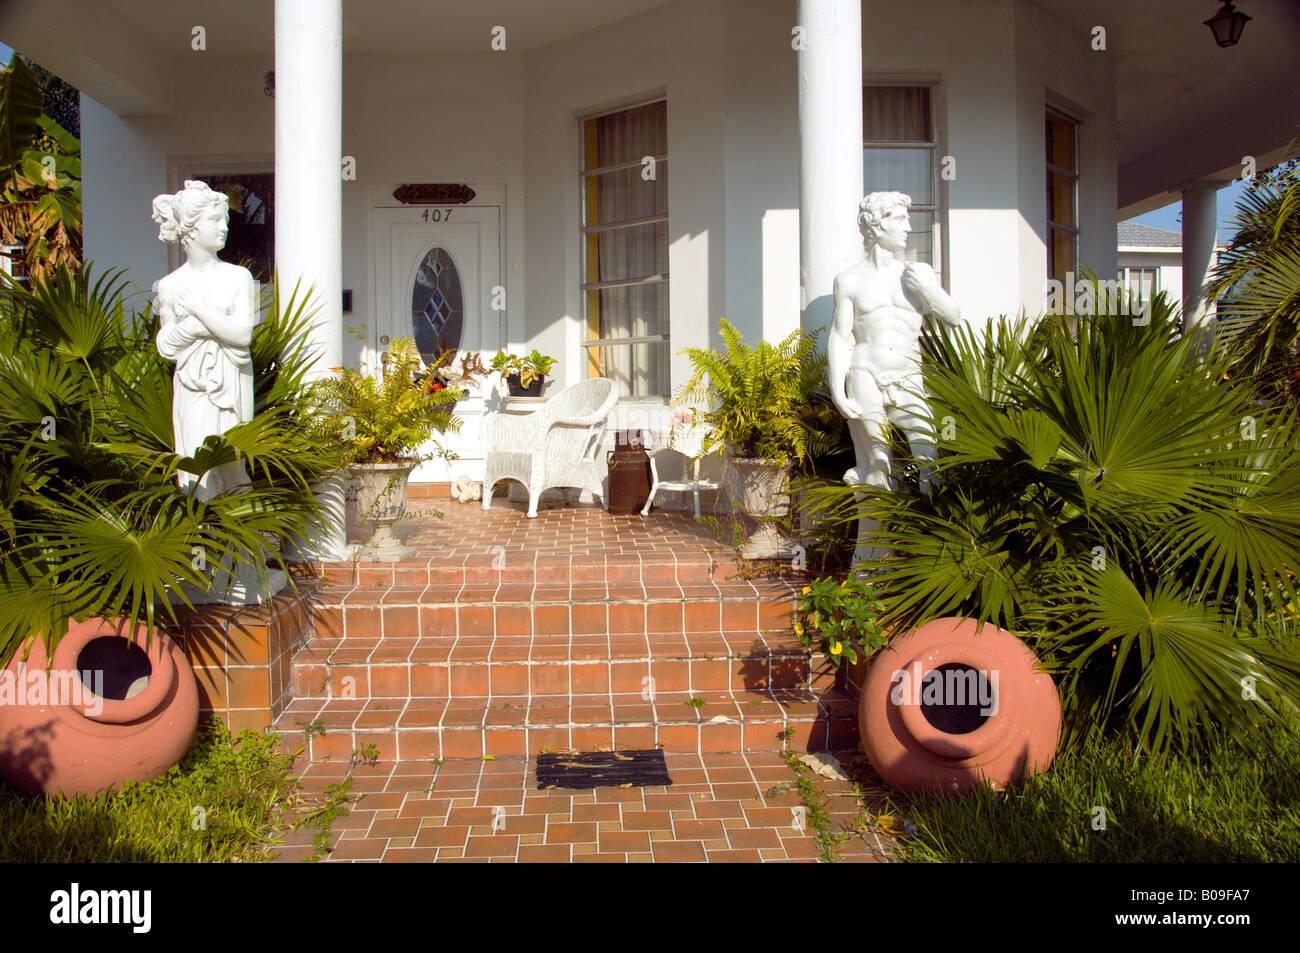 The entrance to an historic home in Key West Florida USA Stock Photo